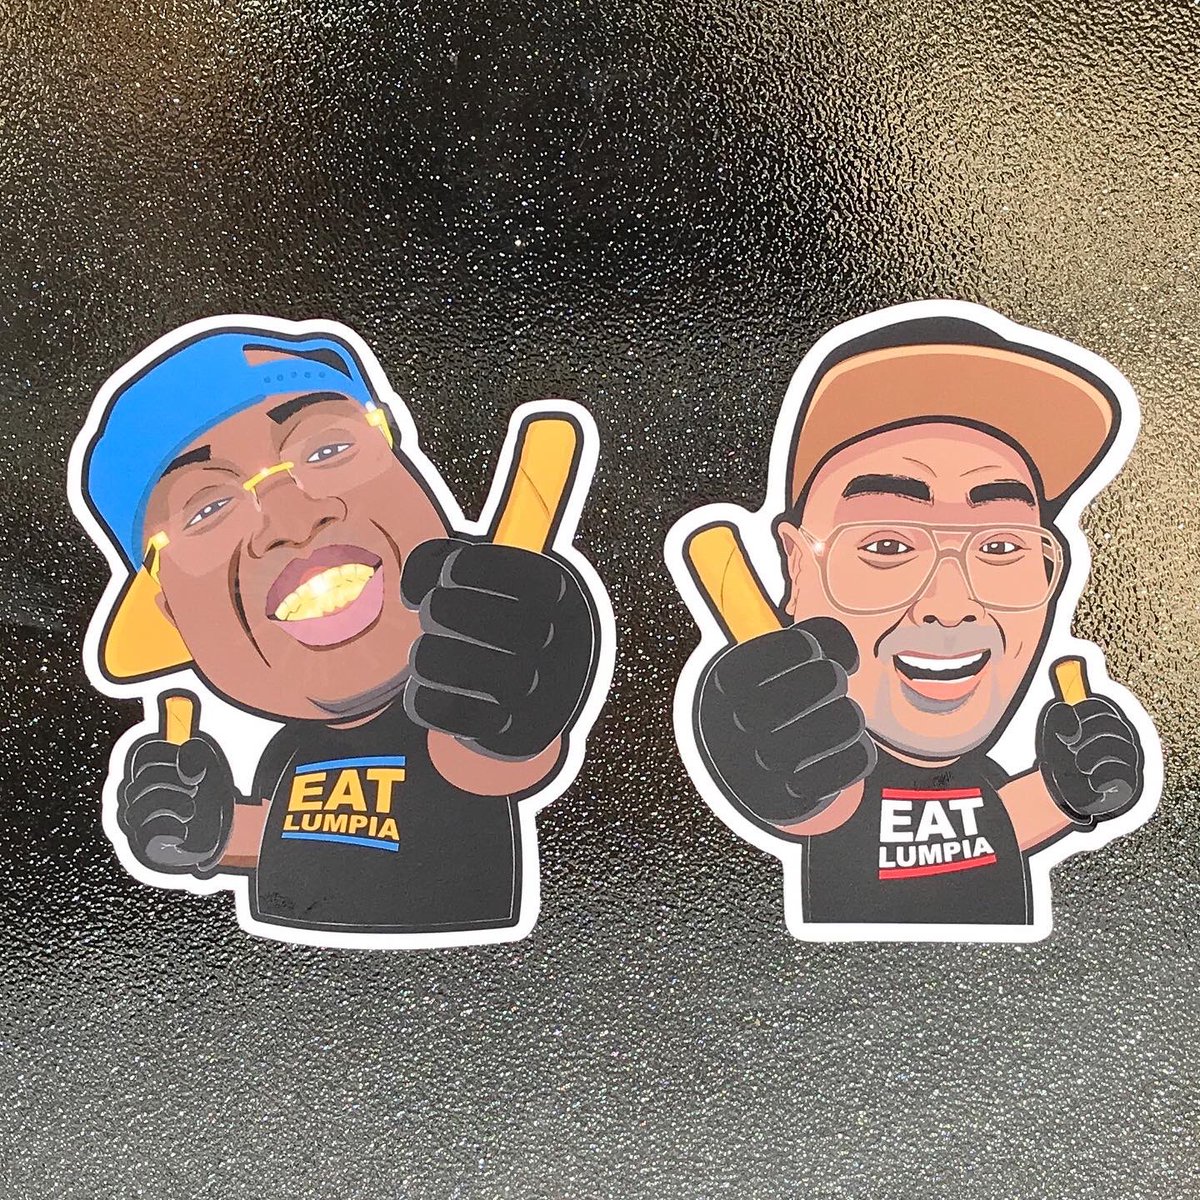 It’s #NationalLumpiaDay
So I had to pick up some delicious #Lumpia @TheLumpiaCompany!
Got these cool stickers of @E40 and @LumpiaChef too!
#OaklandEats #FilipinoFood 
💙💛❤️